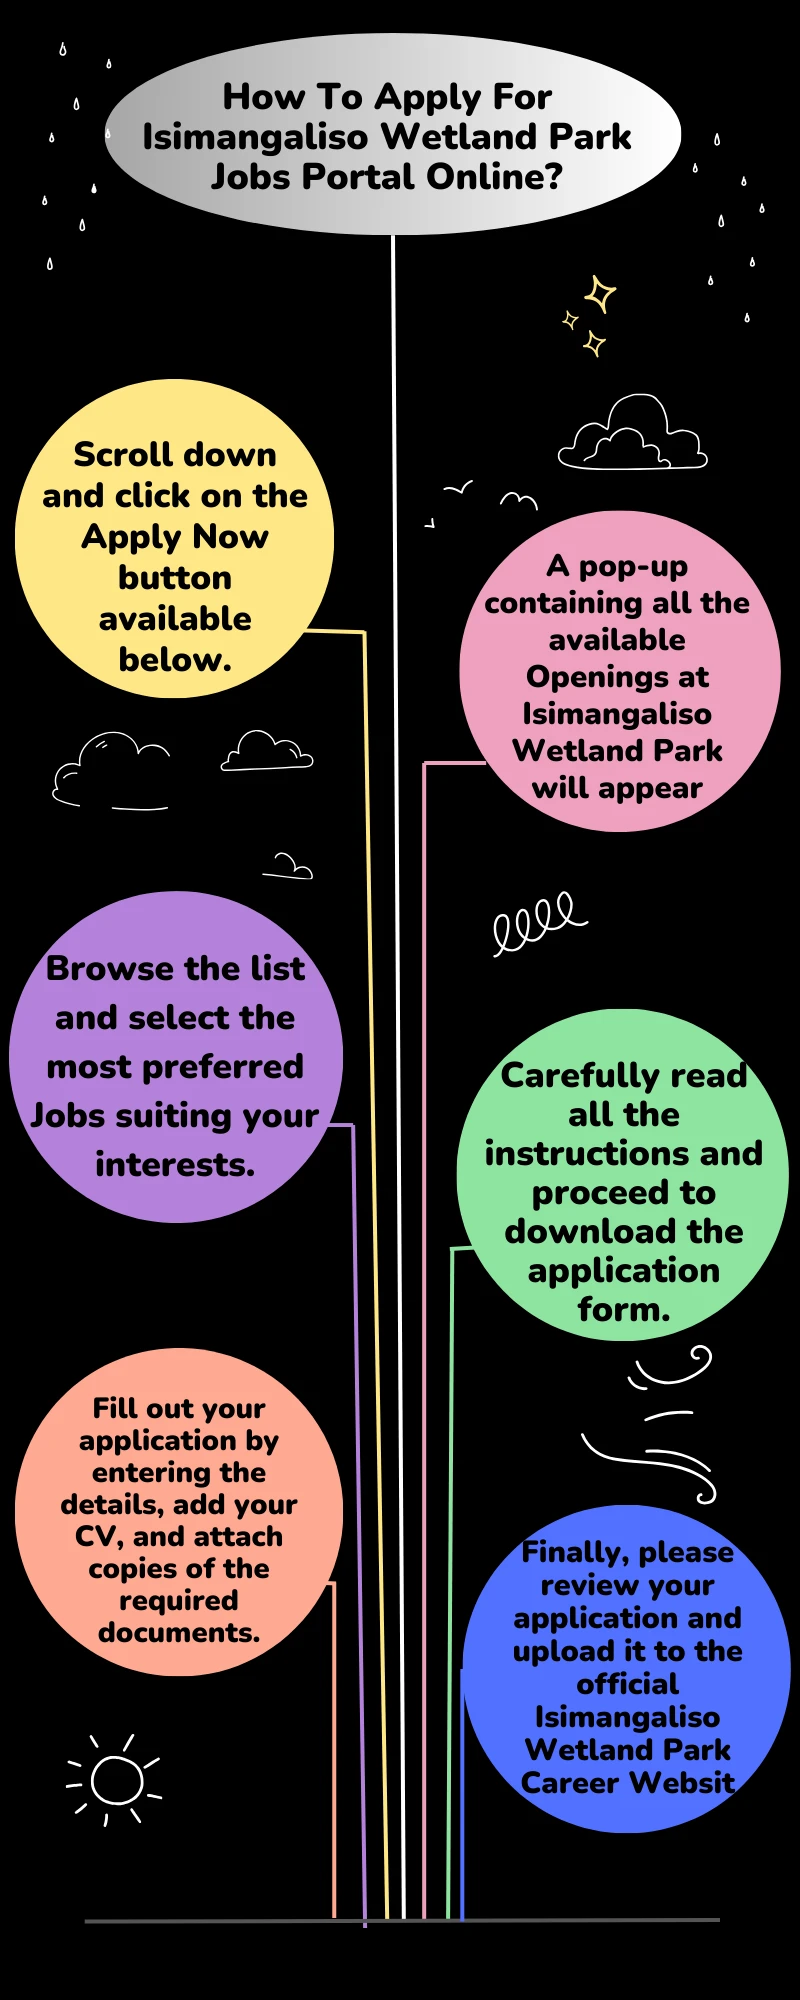 How To Apply For Isimangaliso Wetland Park Jobs Portal Online?